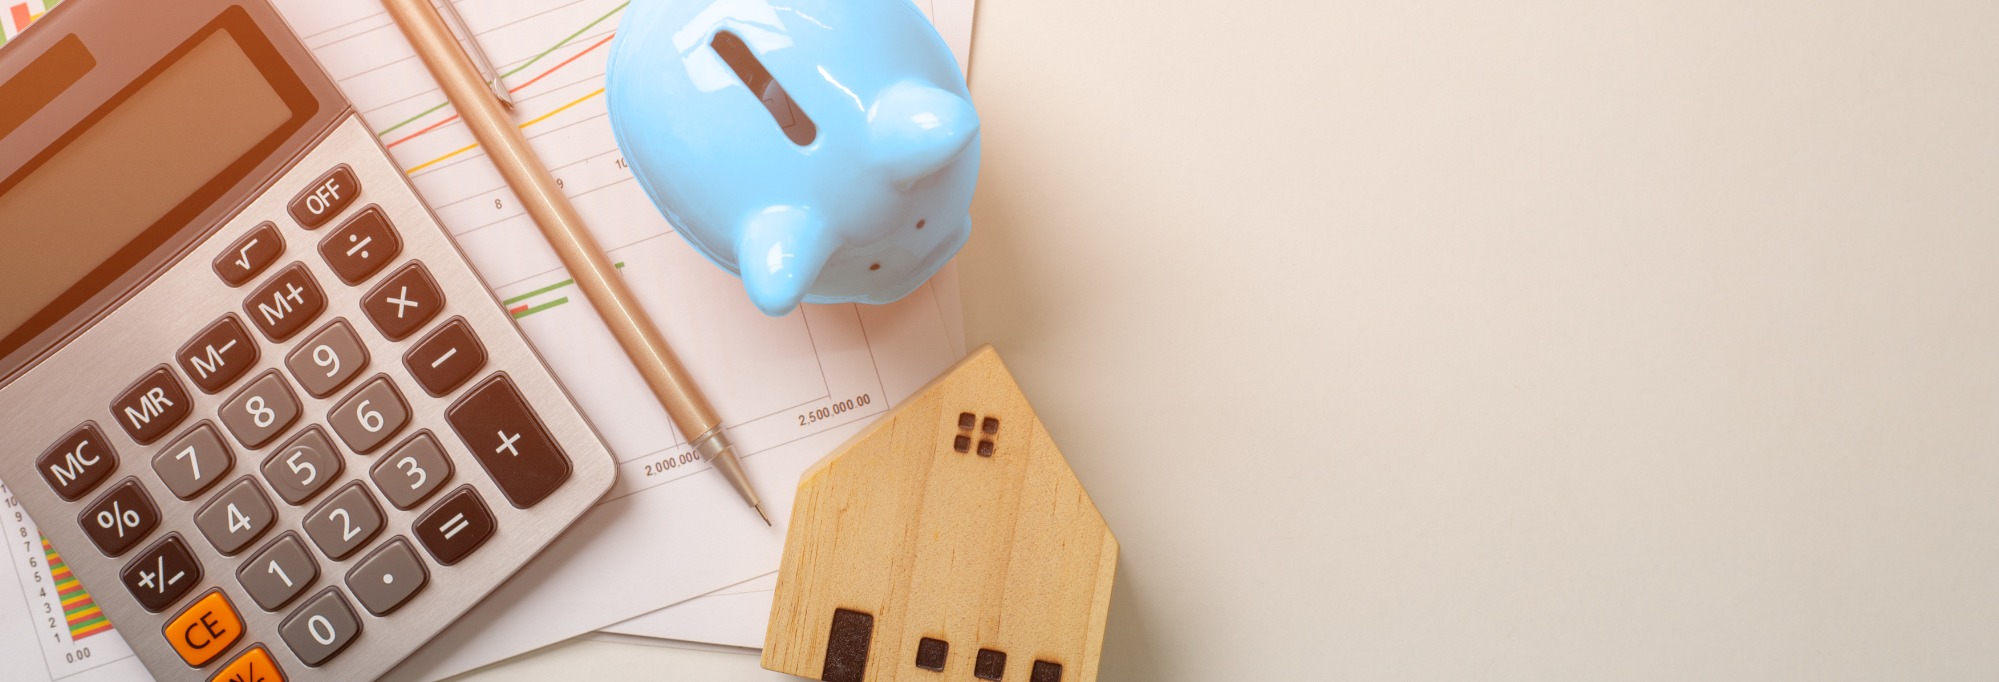 Qualified Business Income Deductions for landlords, depicted with a calculator, a blue piggy bank and a wooden home.